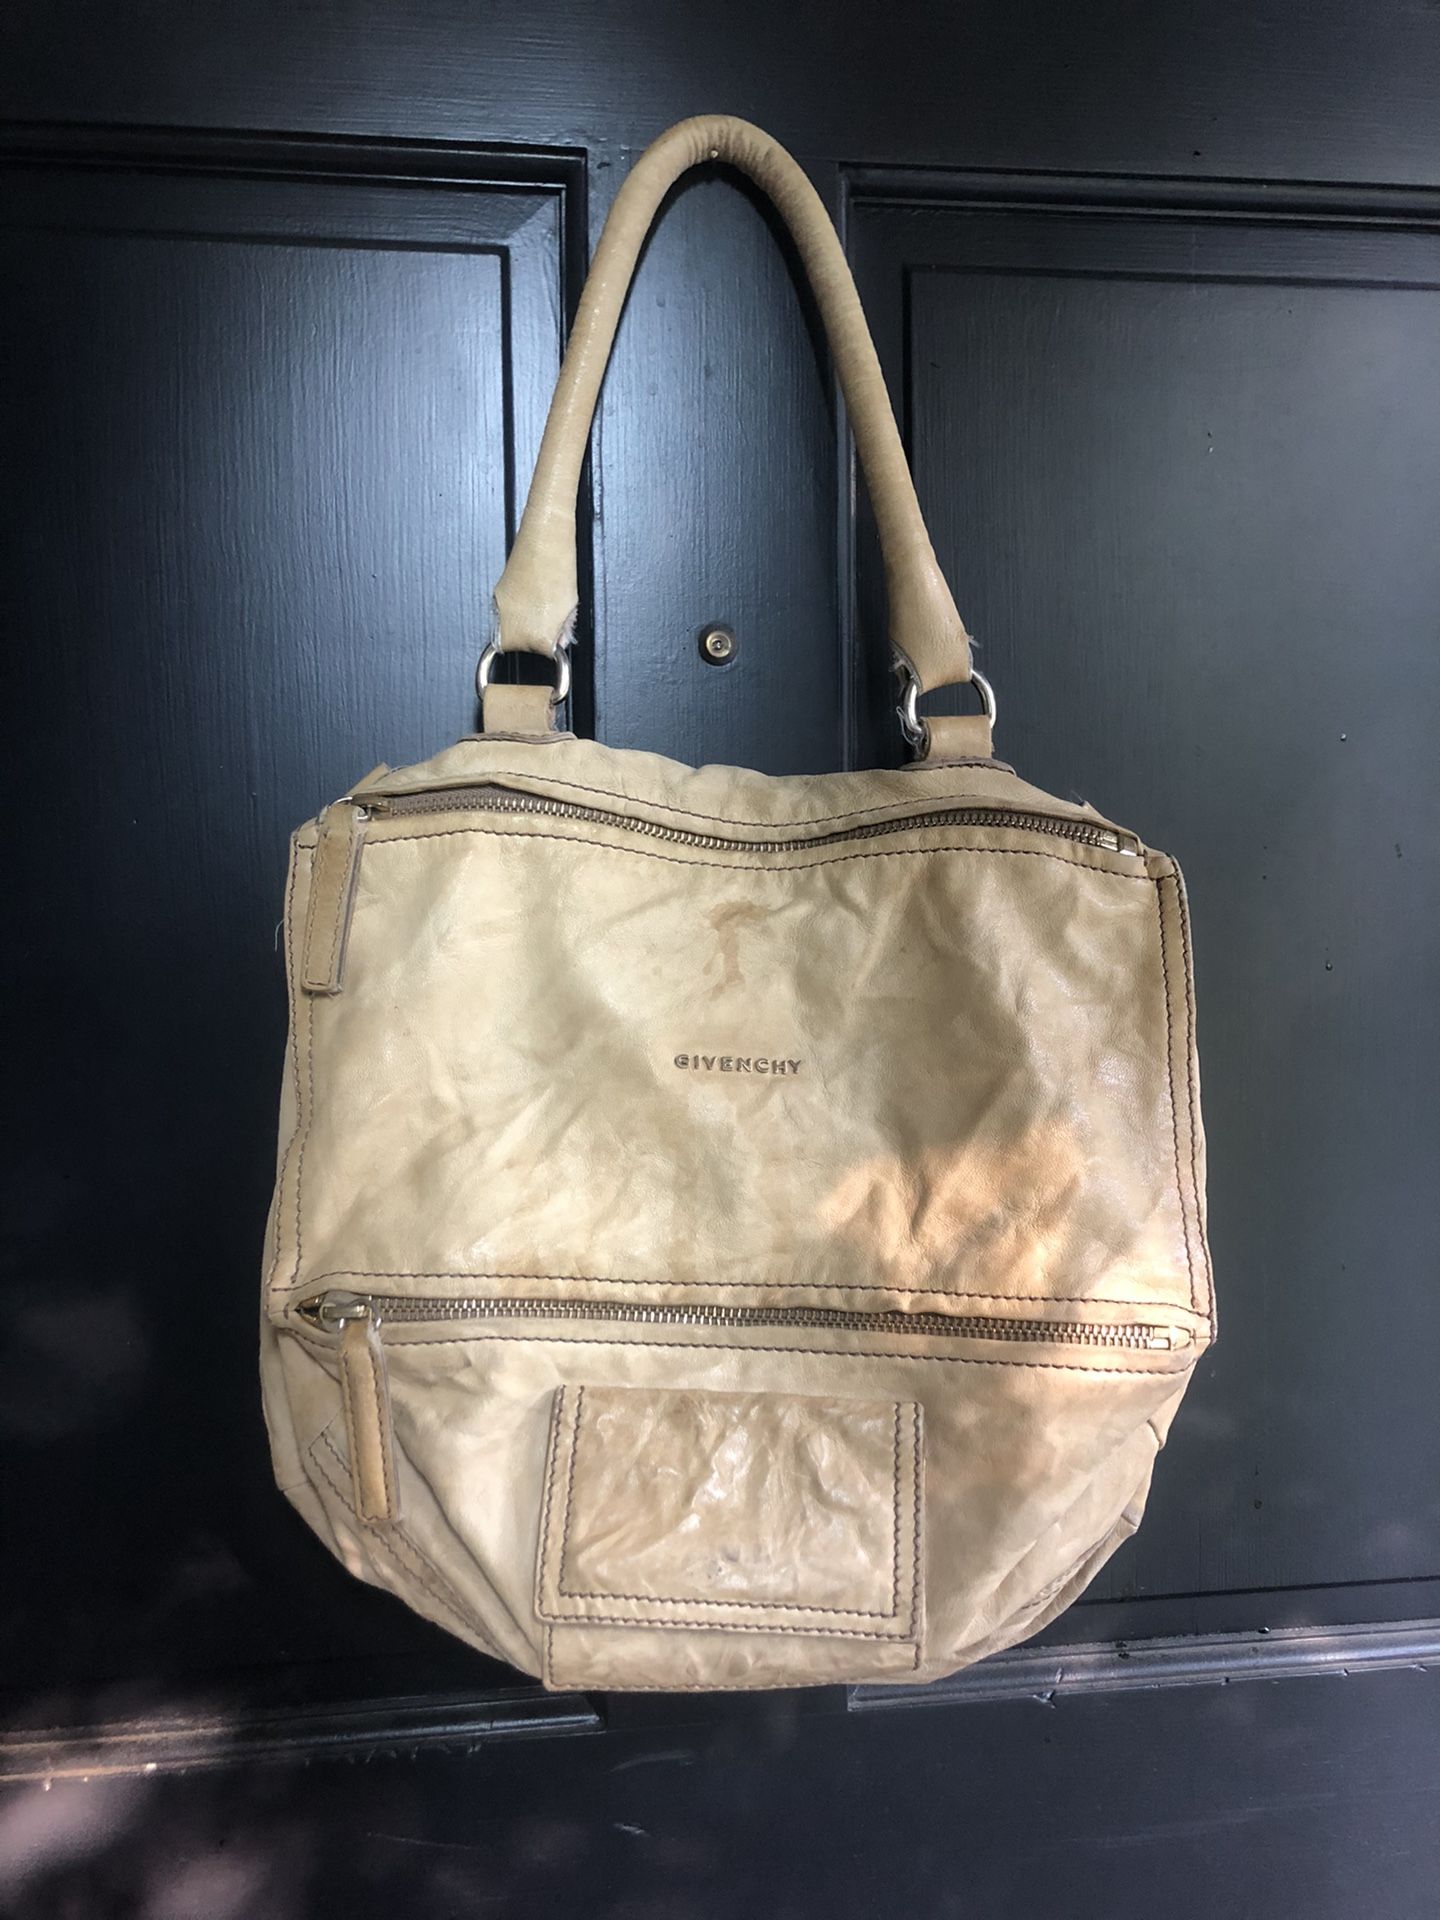 GIVENCHY leather bag